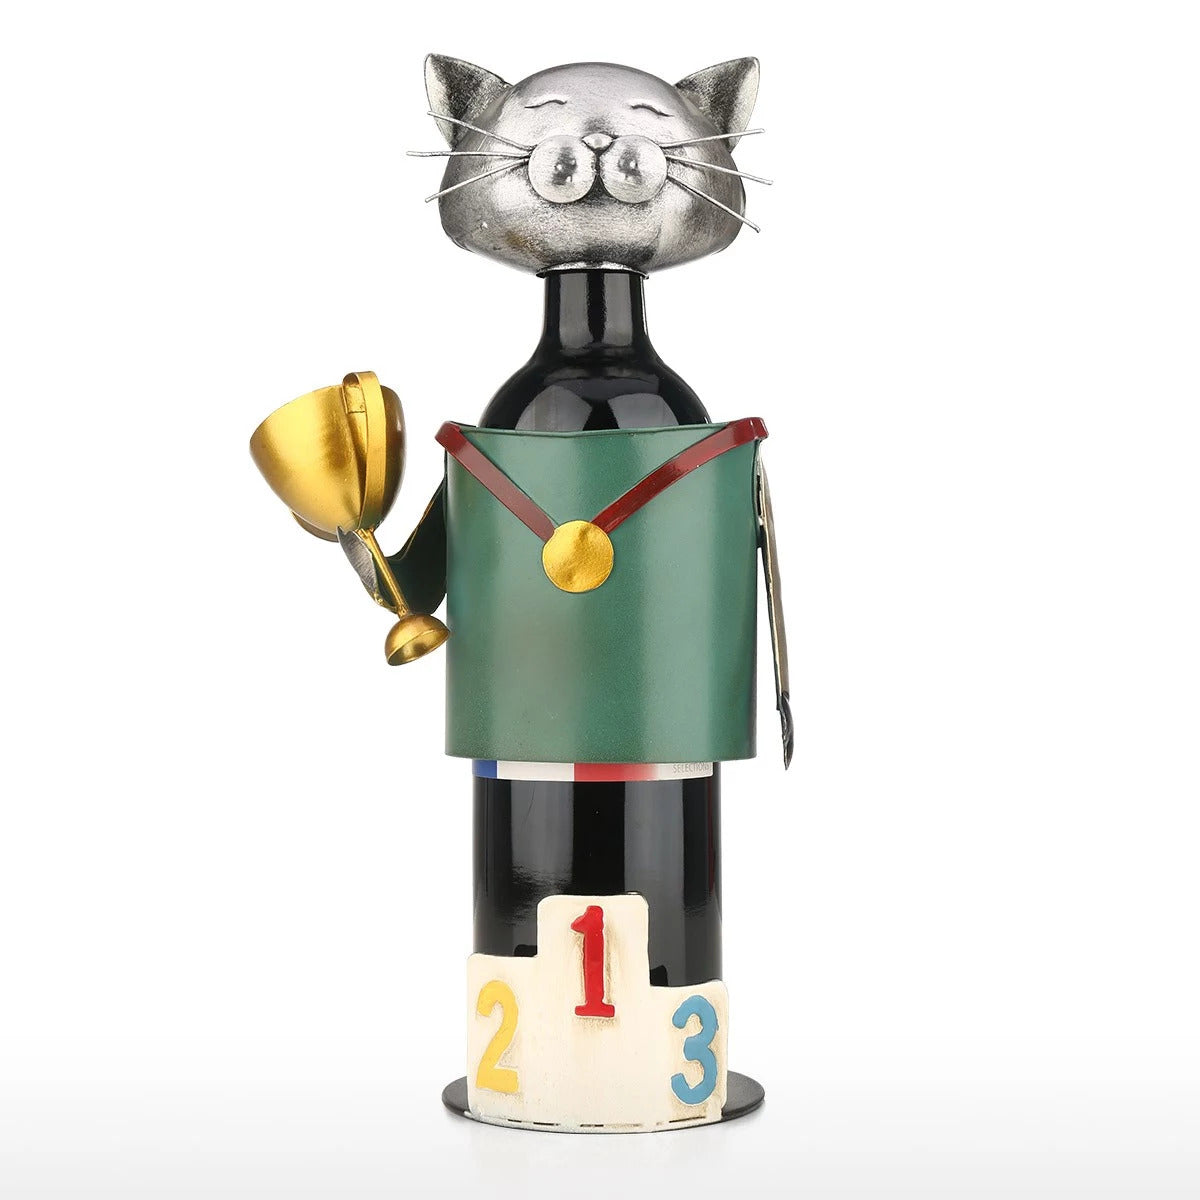 Gifts For Cat Lovers as Ornaments Countertop Wine Rack